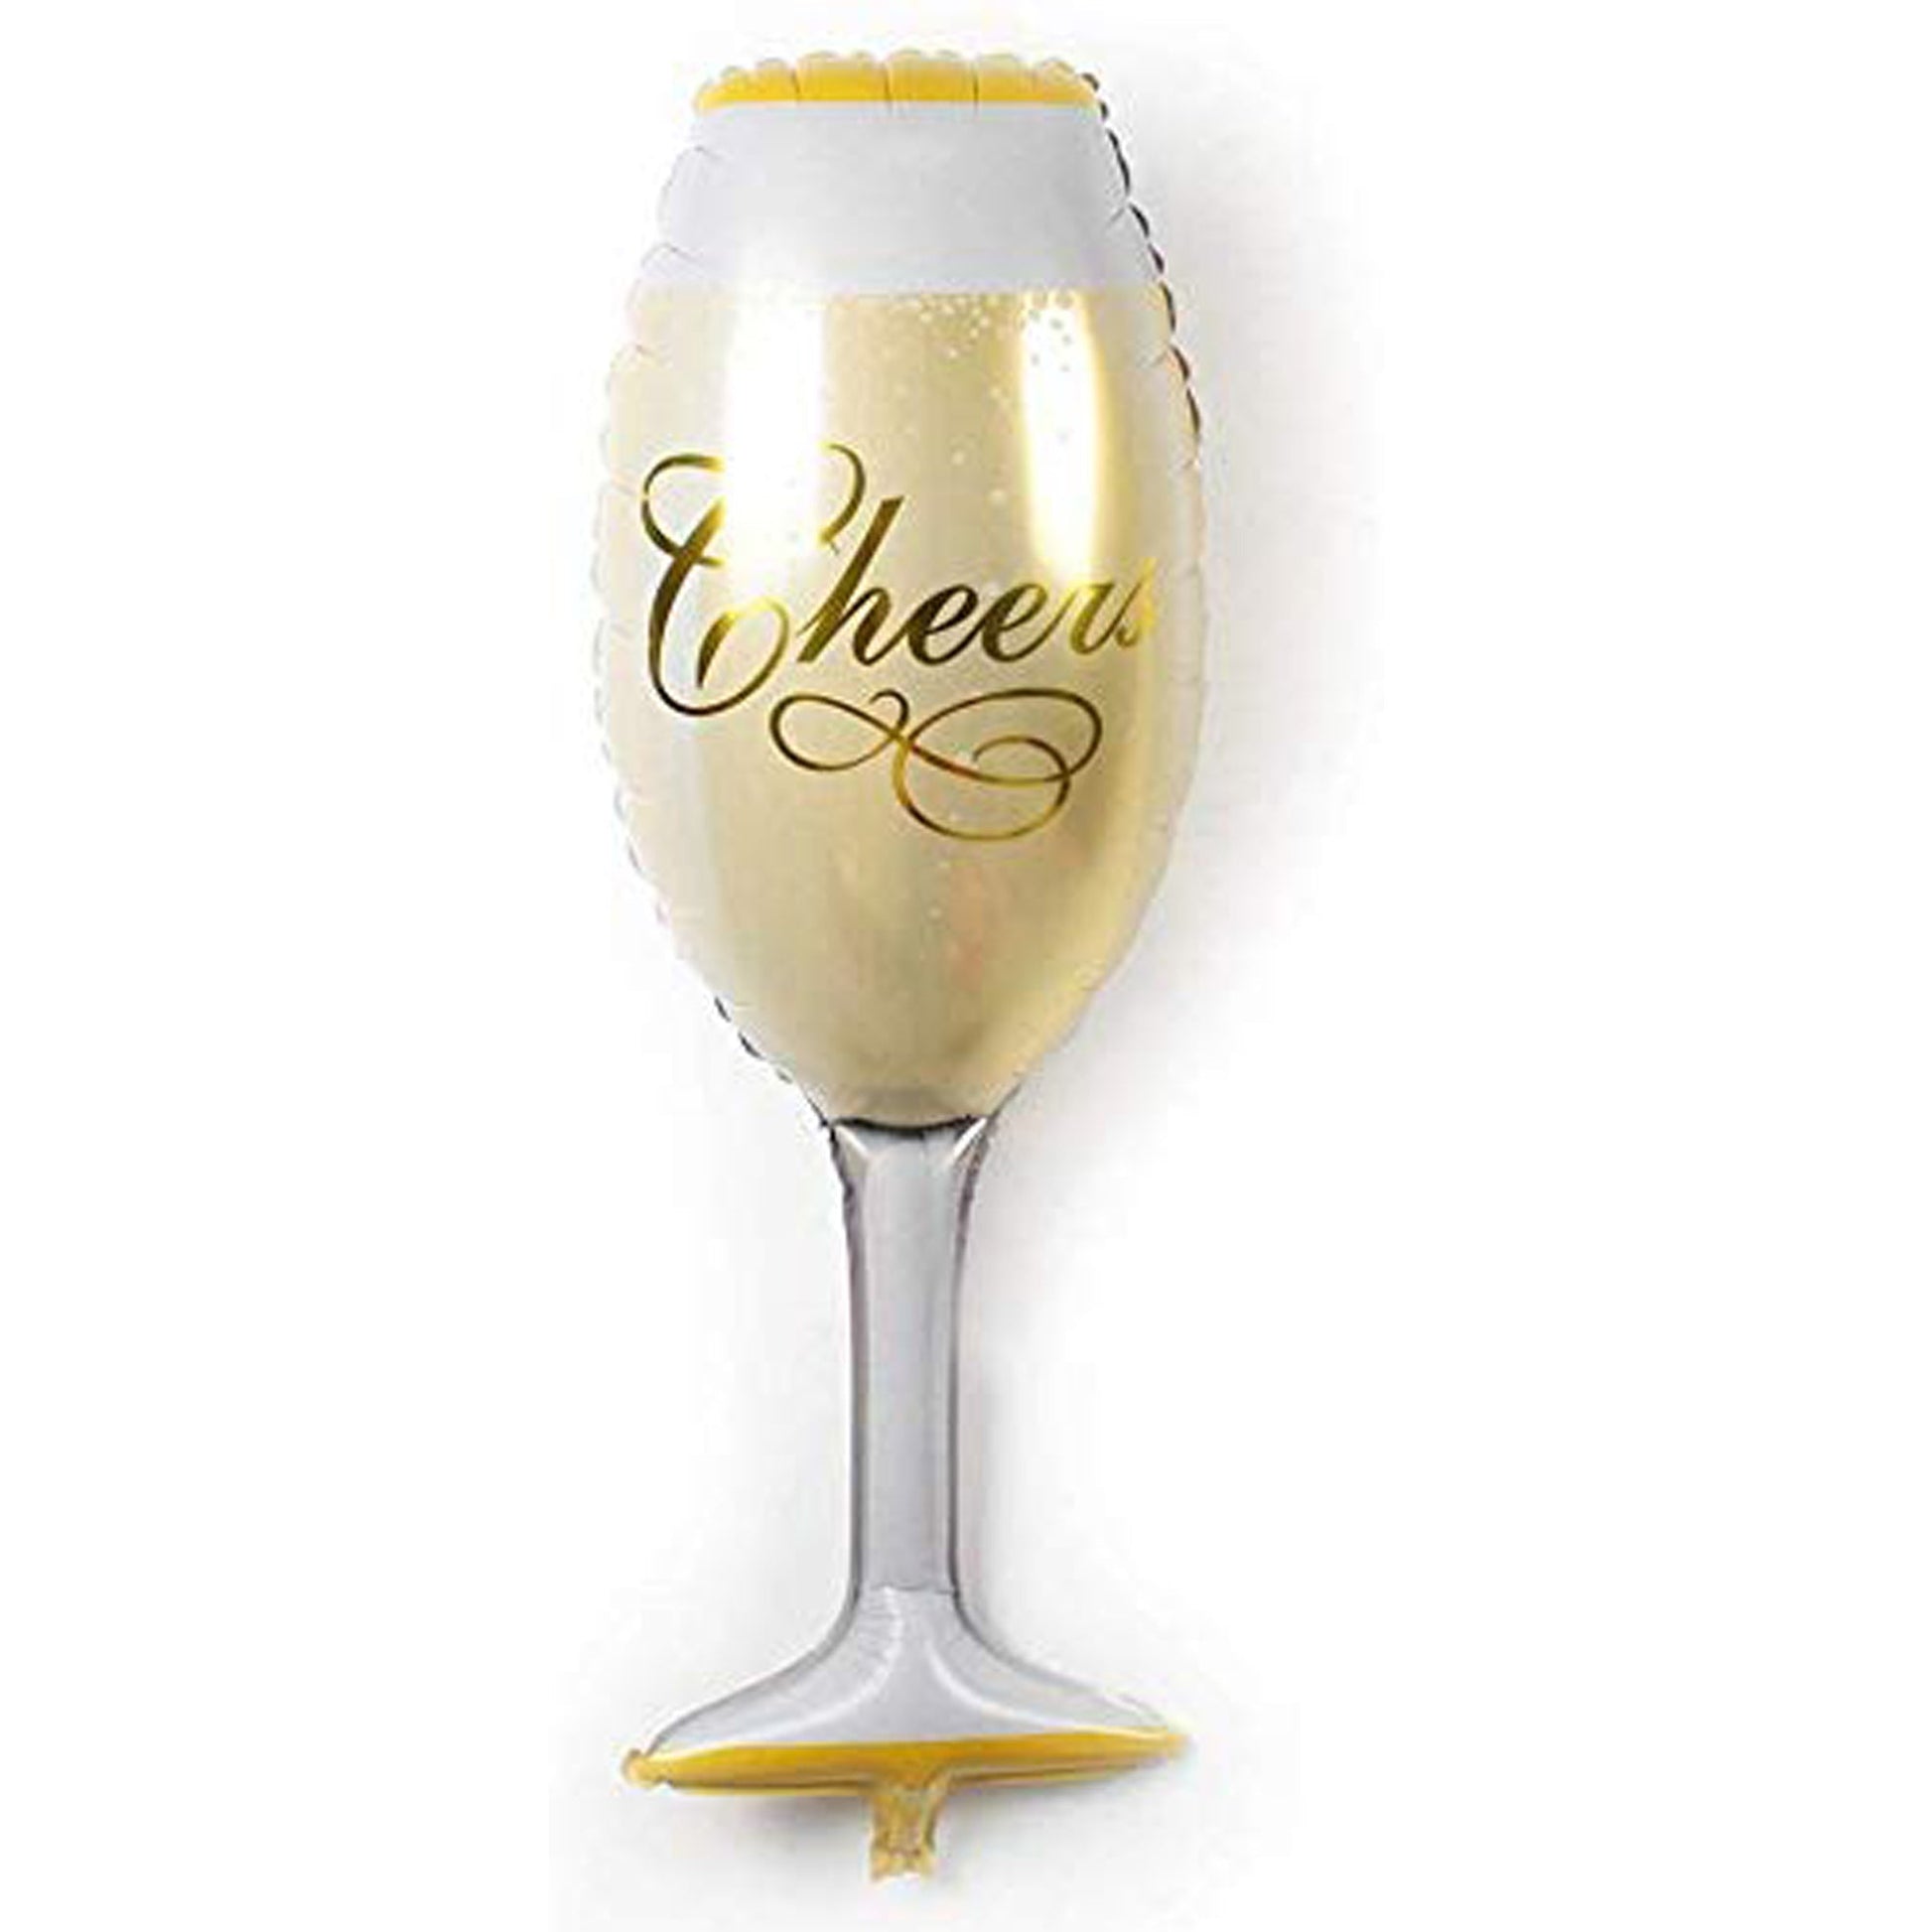 Cheers Glass Foil Balloon for Party Decoration - CherishX Partystore